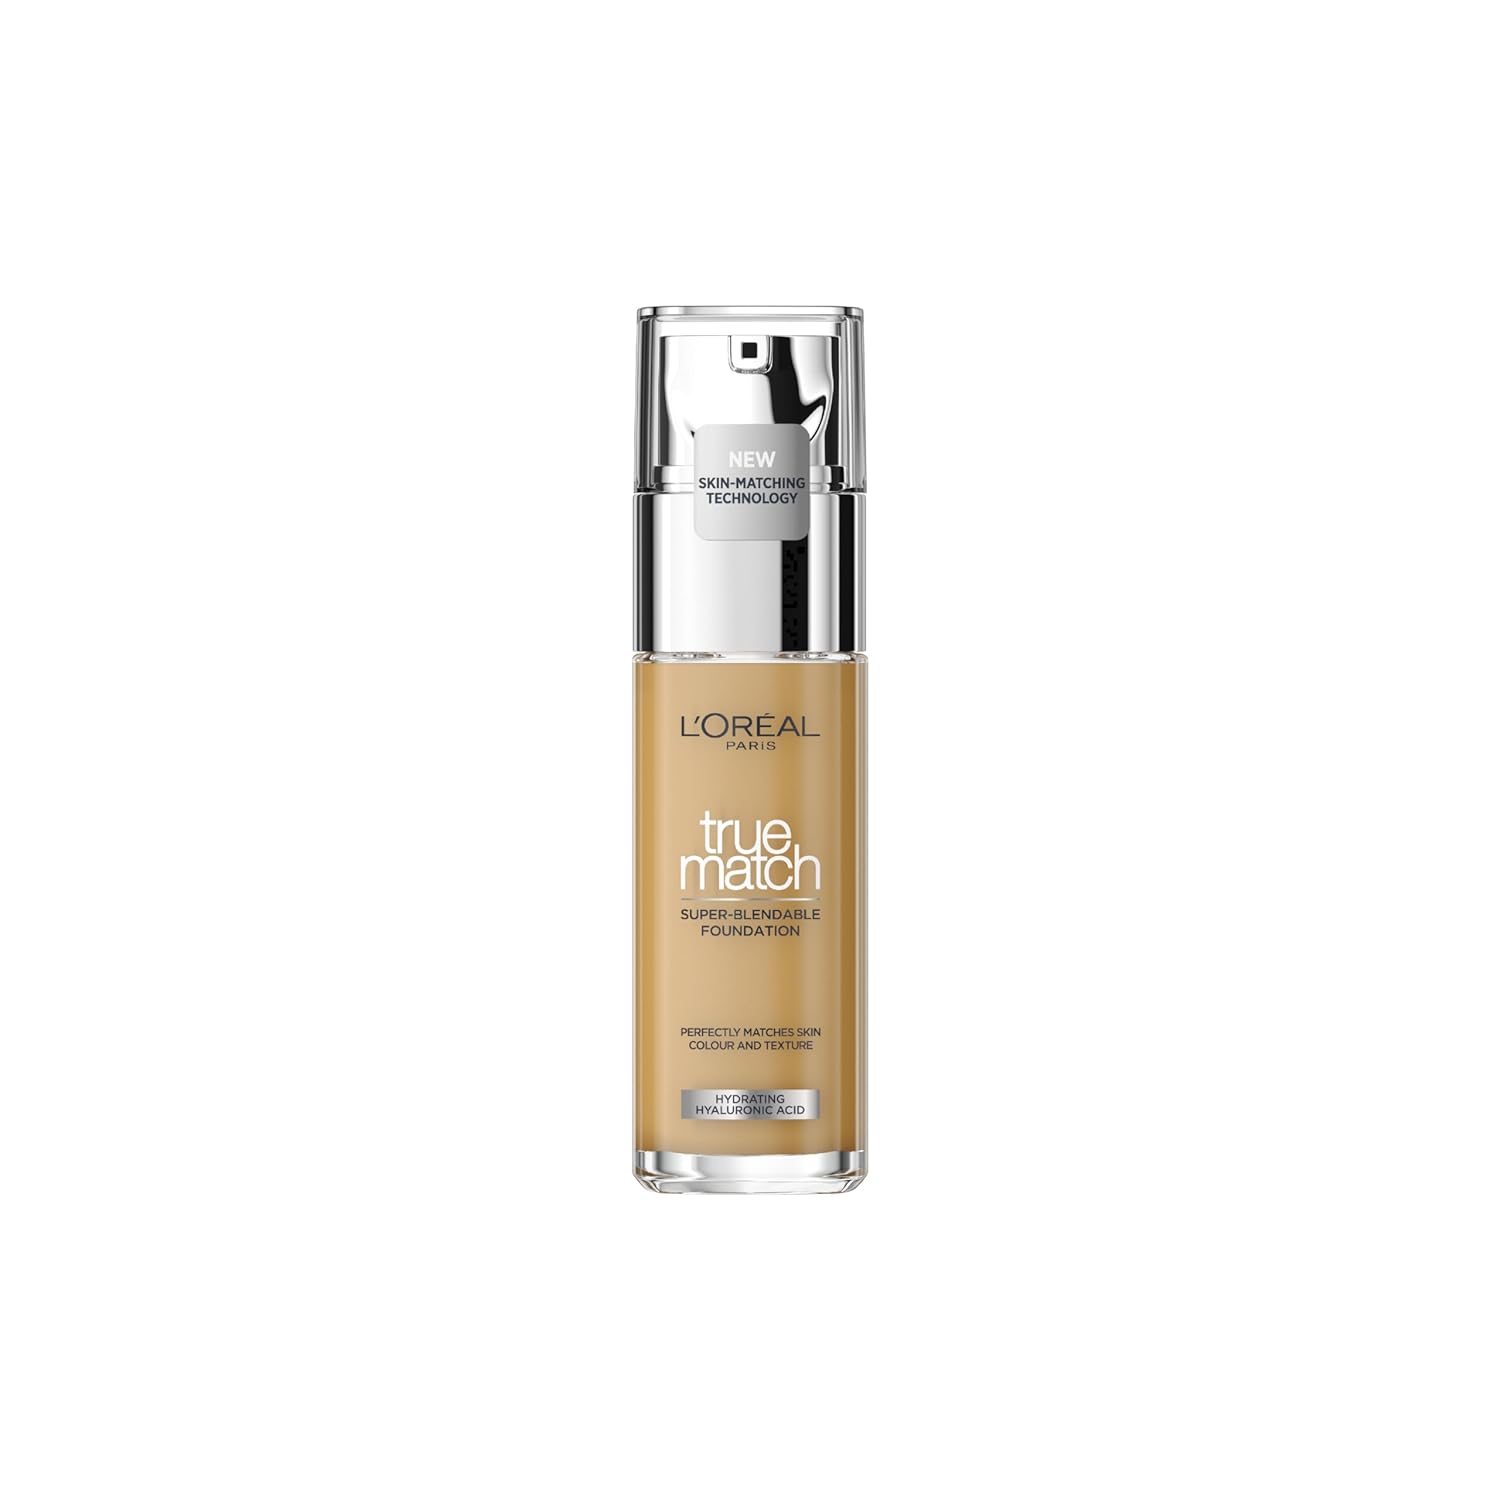 L \ 'ORAL Paris True Match Liquid Foundation, Skin Care With Hyaluronic Acid, SPF 17, Available in 40 Shades, 4D/4W, Naturel Dore/Golden Natural, 30 ml